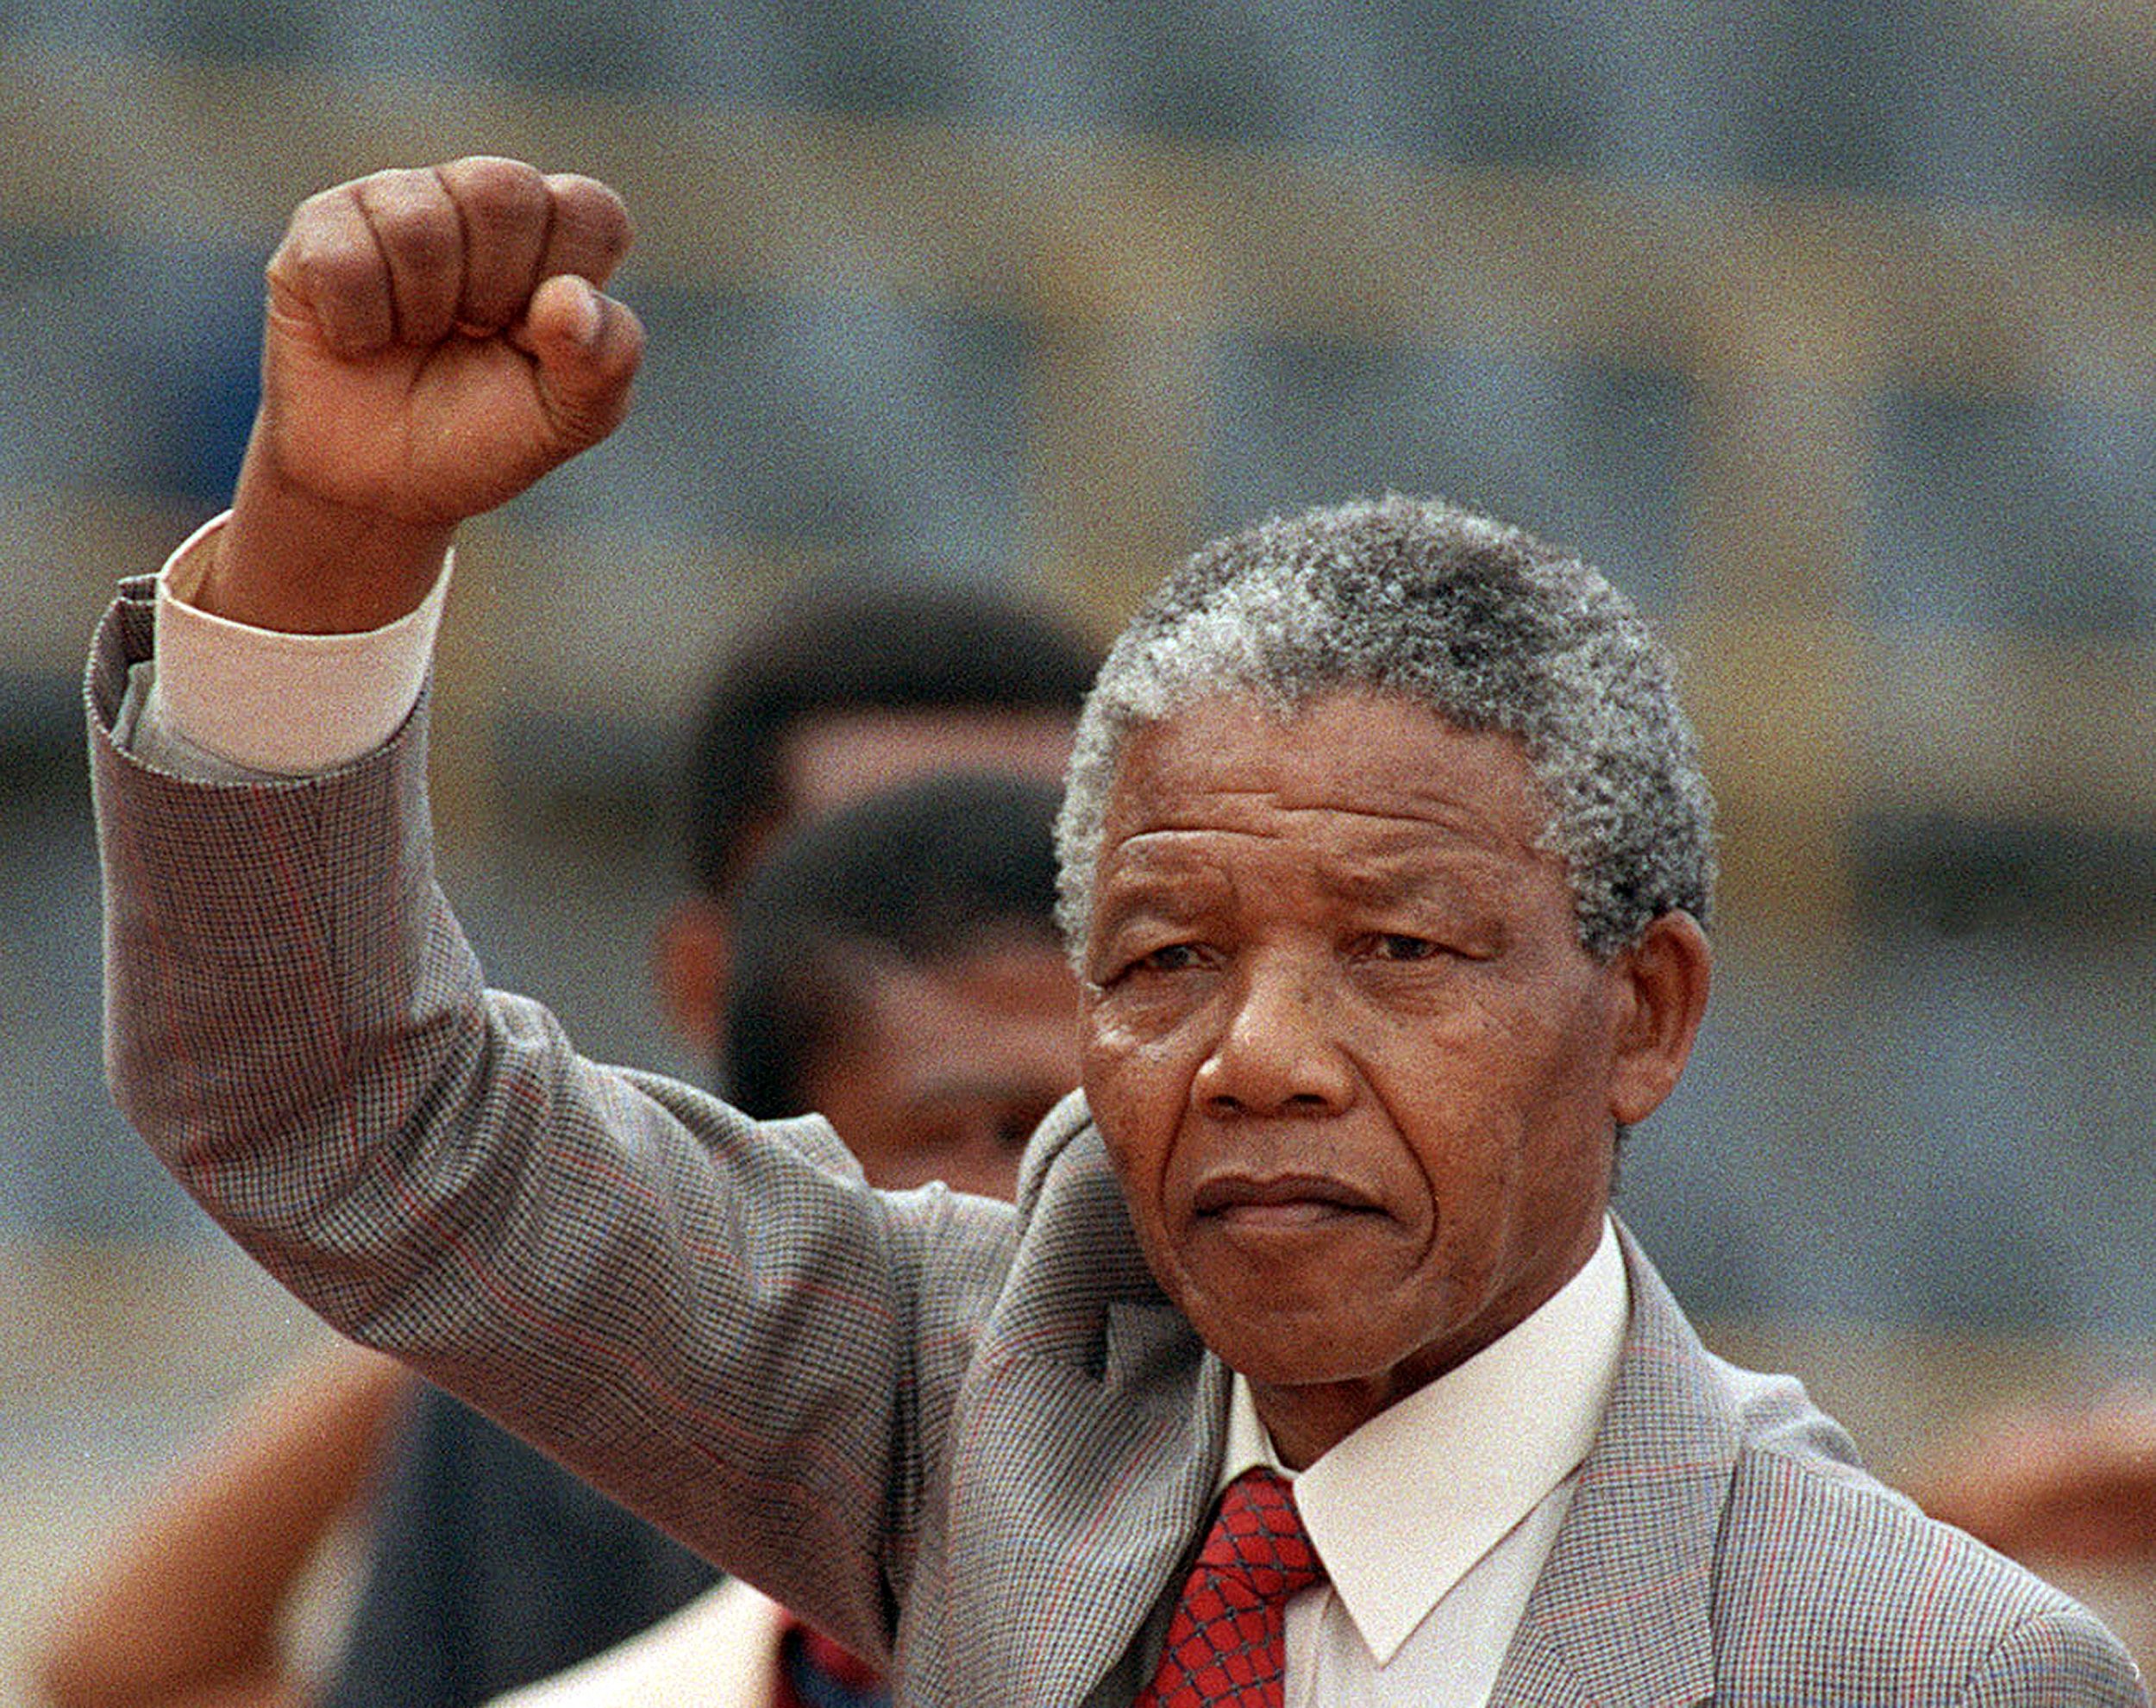 Nelson Mandela Inaugurated As President Of South Africa On May 10th